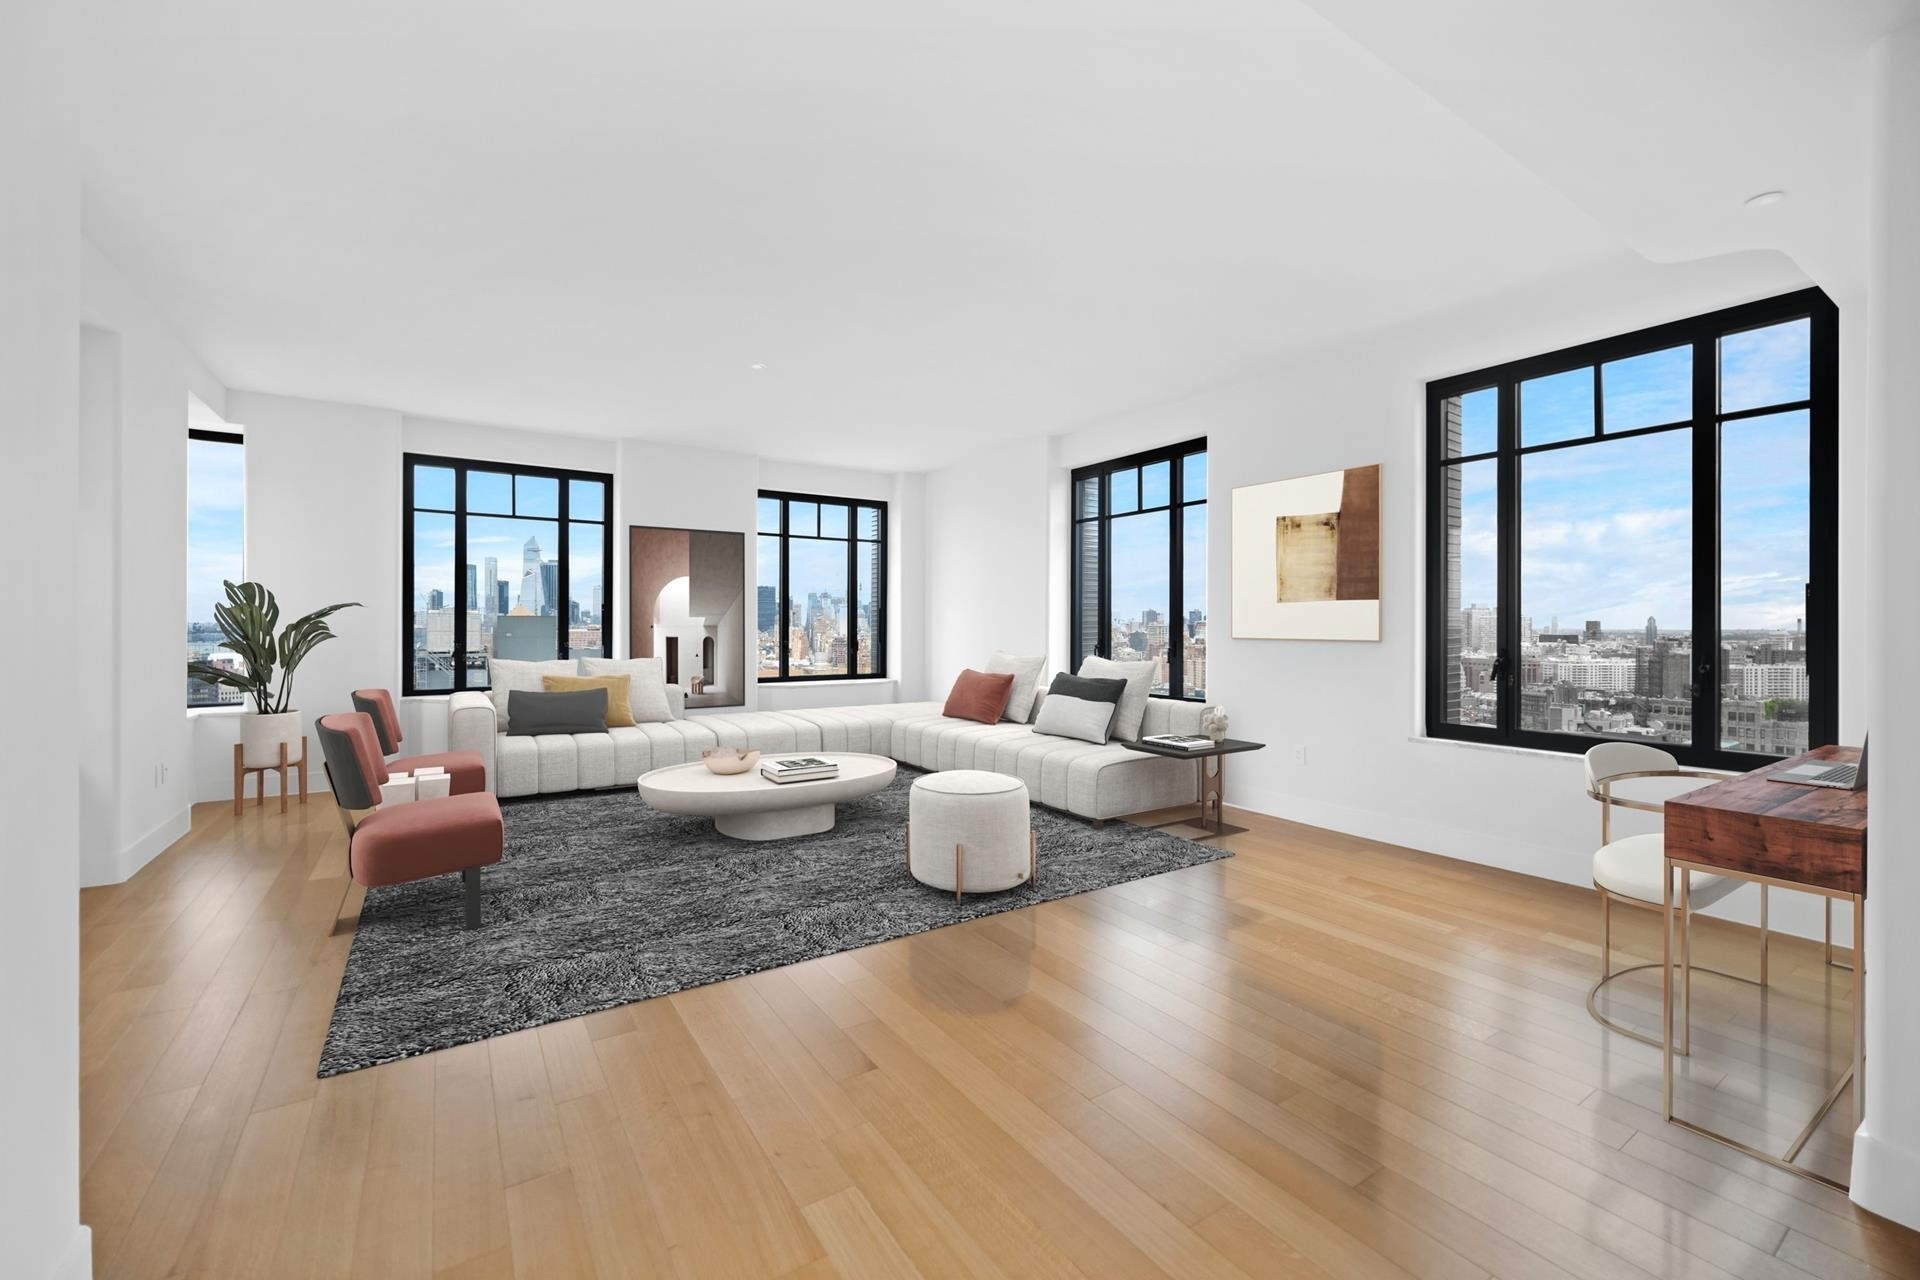 1. Condominiums for Sale at Greenwich West, 110 CHARLTON ST, PH30C Hudson Square, New York, NY 10014